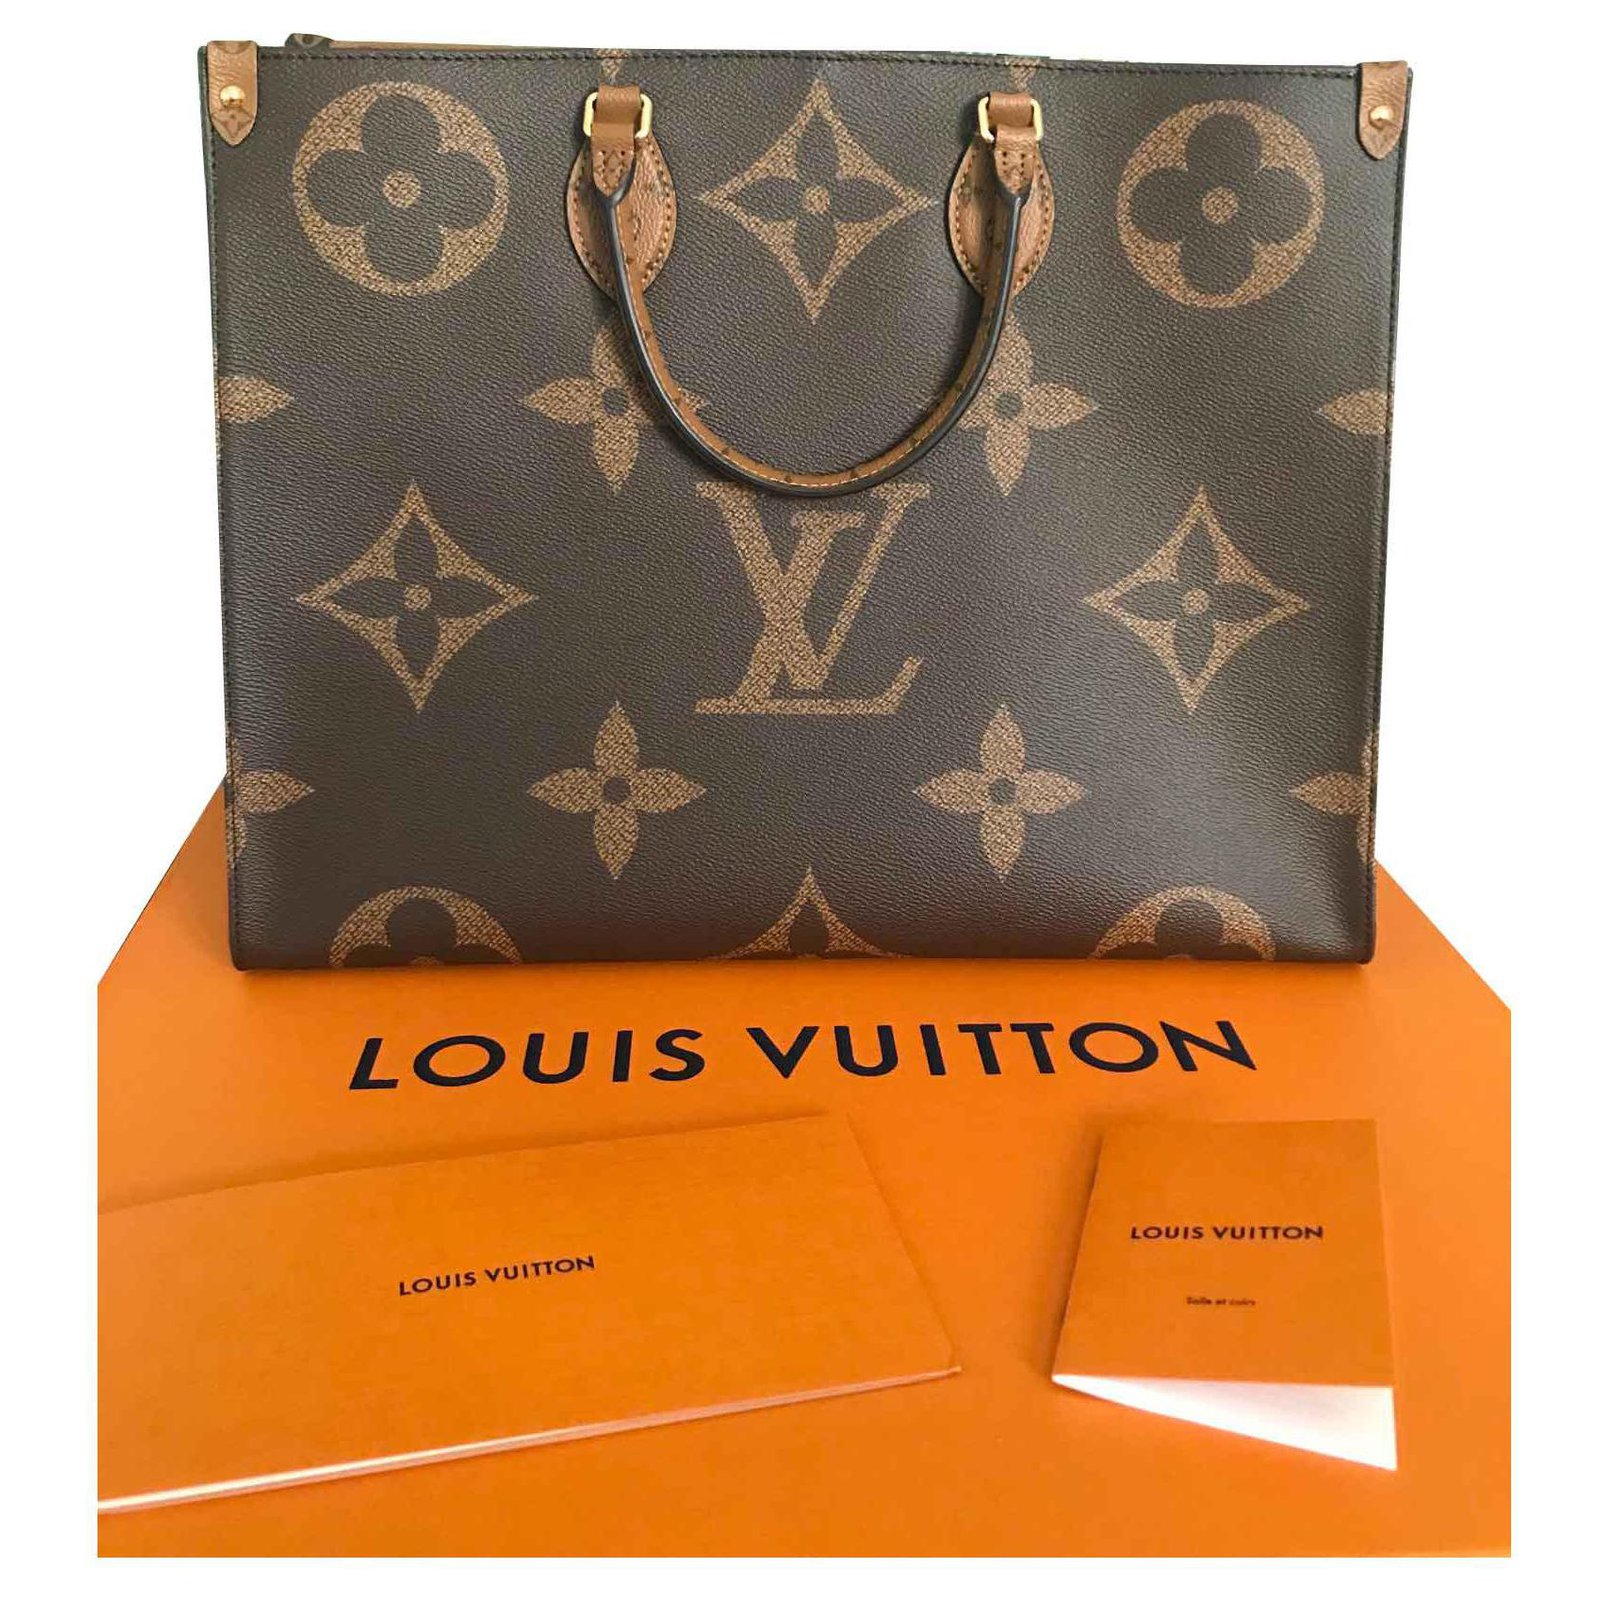 Louis Vuitton 2019 Giant on The Go PM Tote Bag - Brown